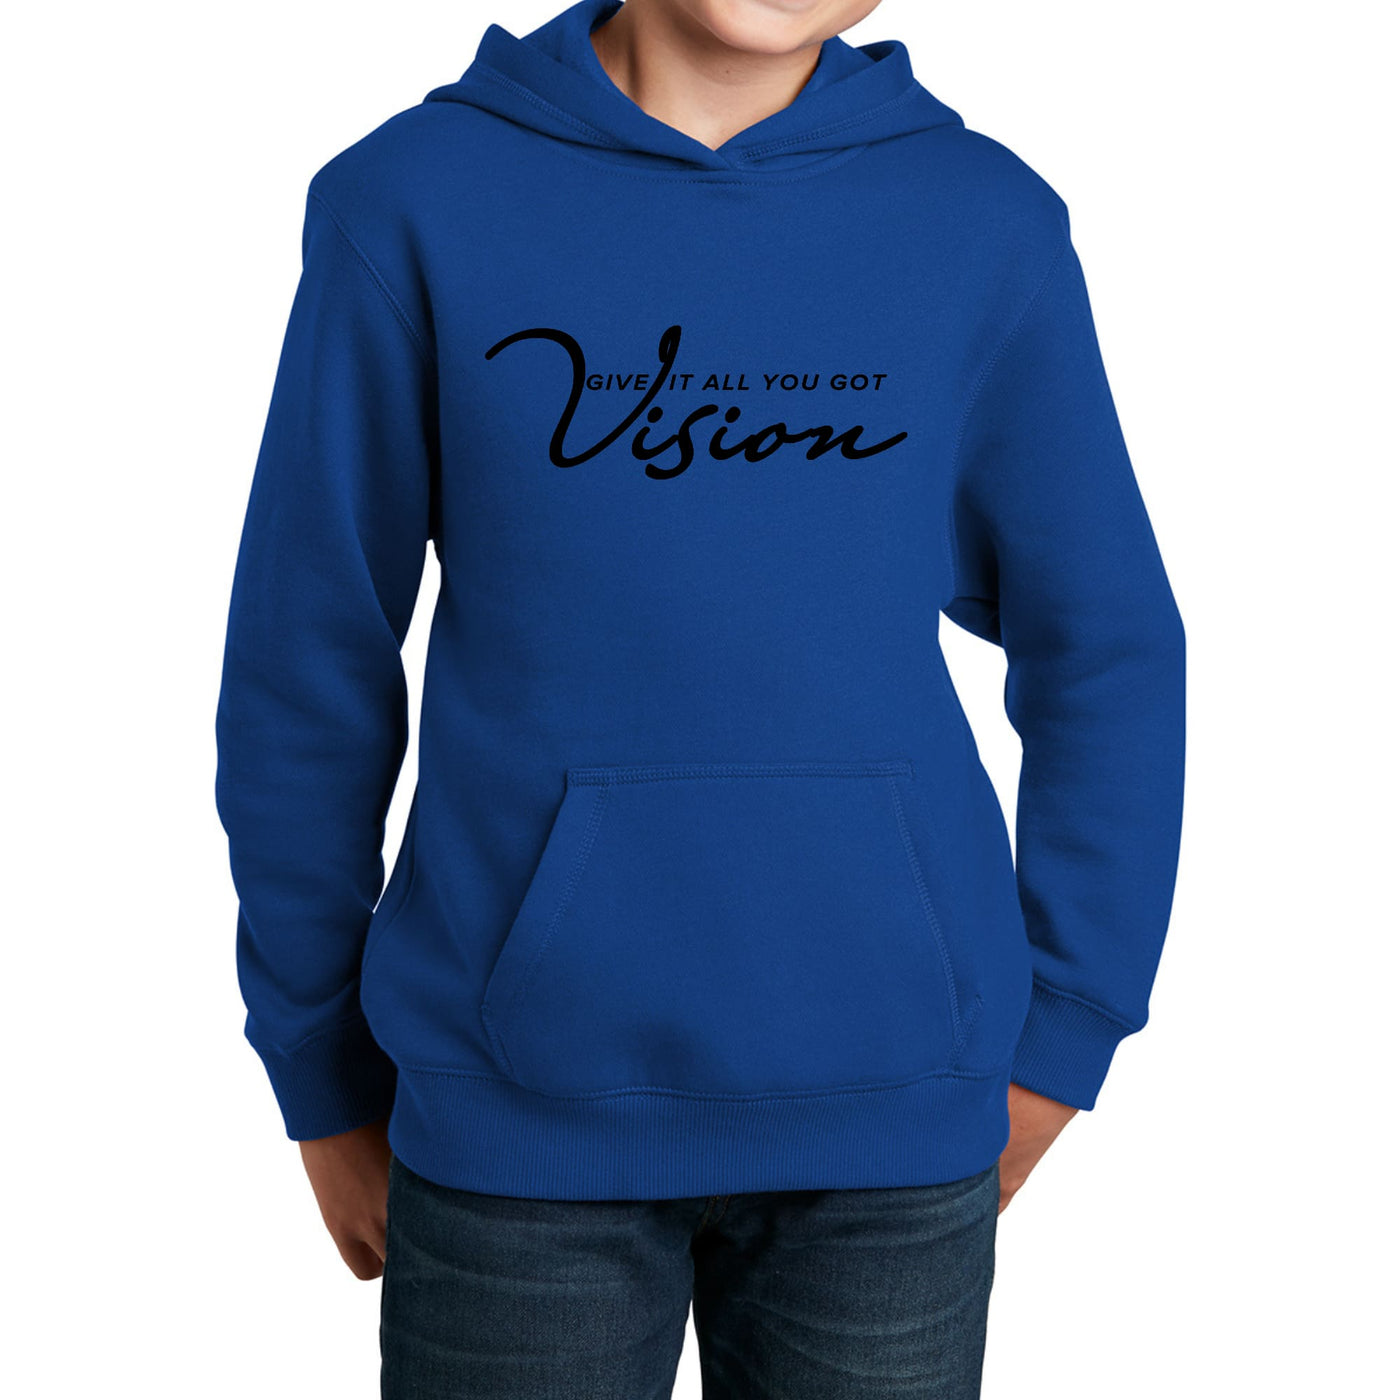 Youth Long Sleeve Hoodie Vision - Give It All You Got Black - Youth | Hoodies